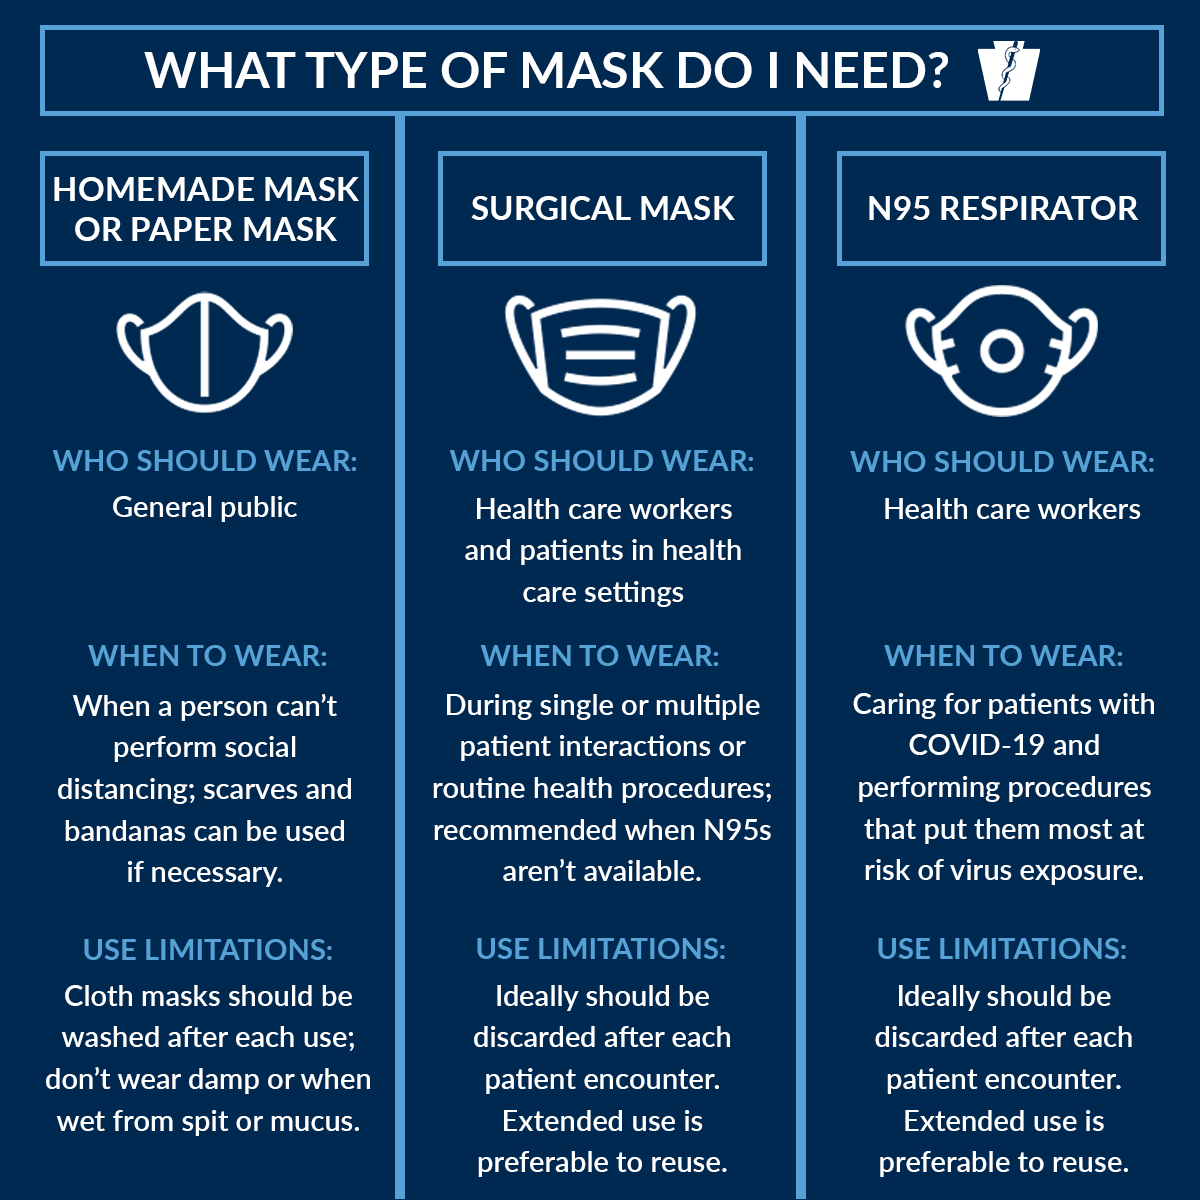 What type of COVID-19 mask you should wear